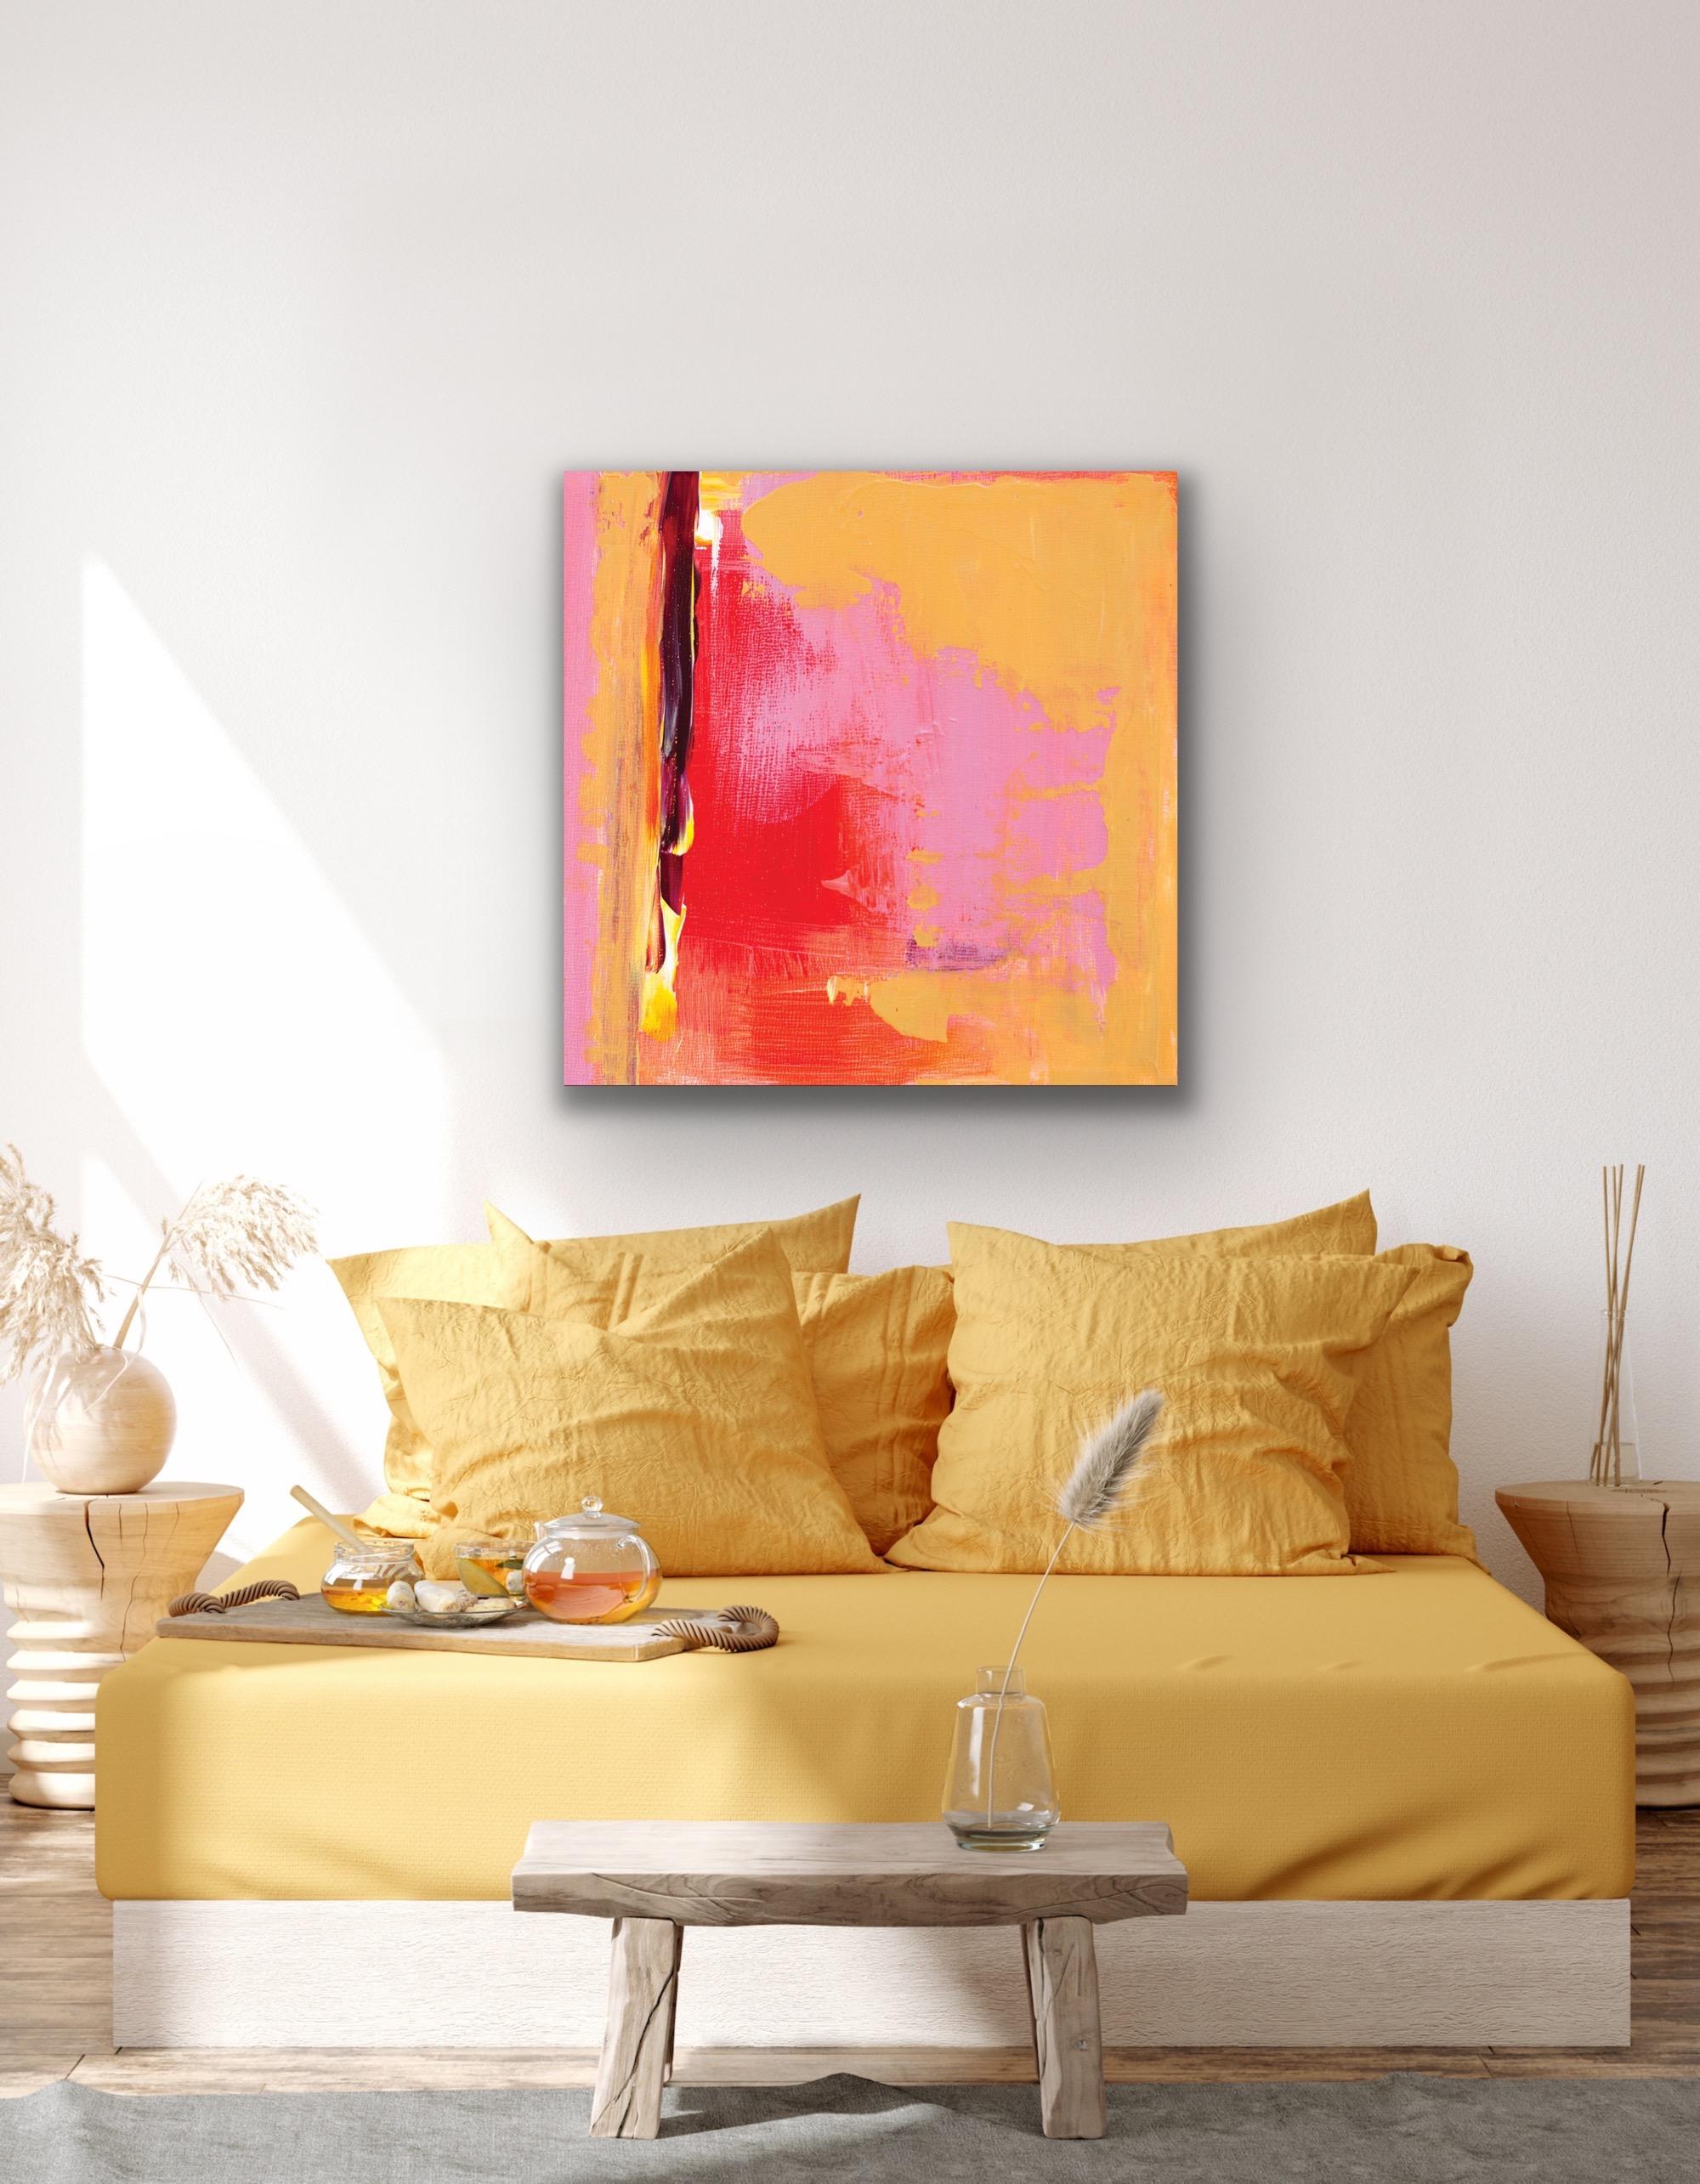 Modern Wall Art, Contemporary Decor, Large Indoor Outdoor Giclee Print on Metal - Beige Abstract Print by Celeste Reiter